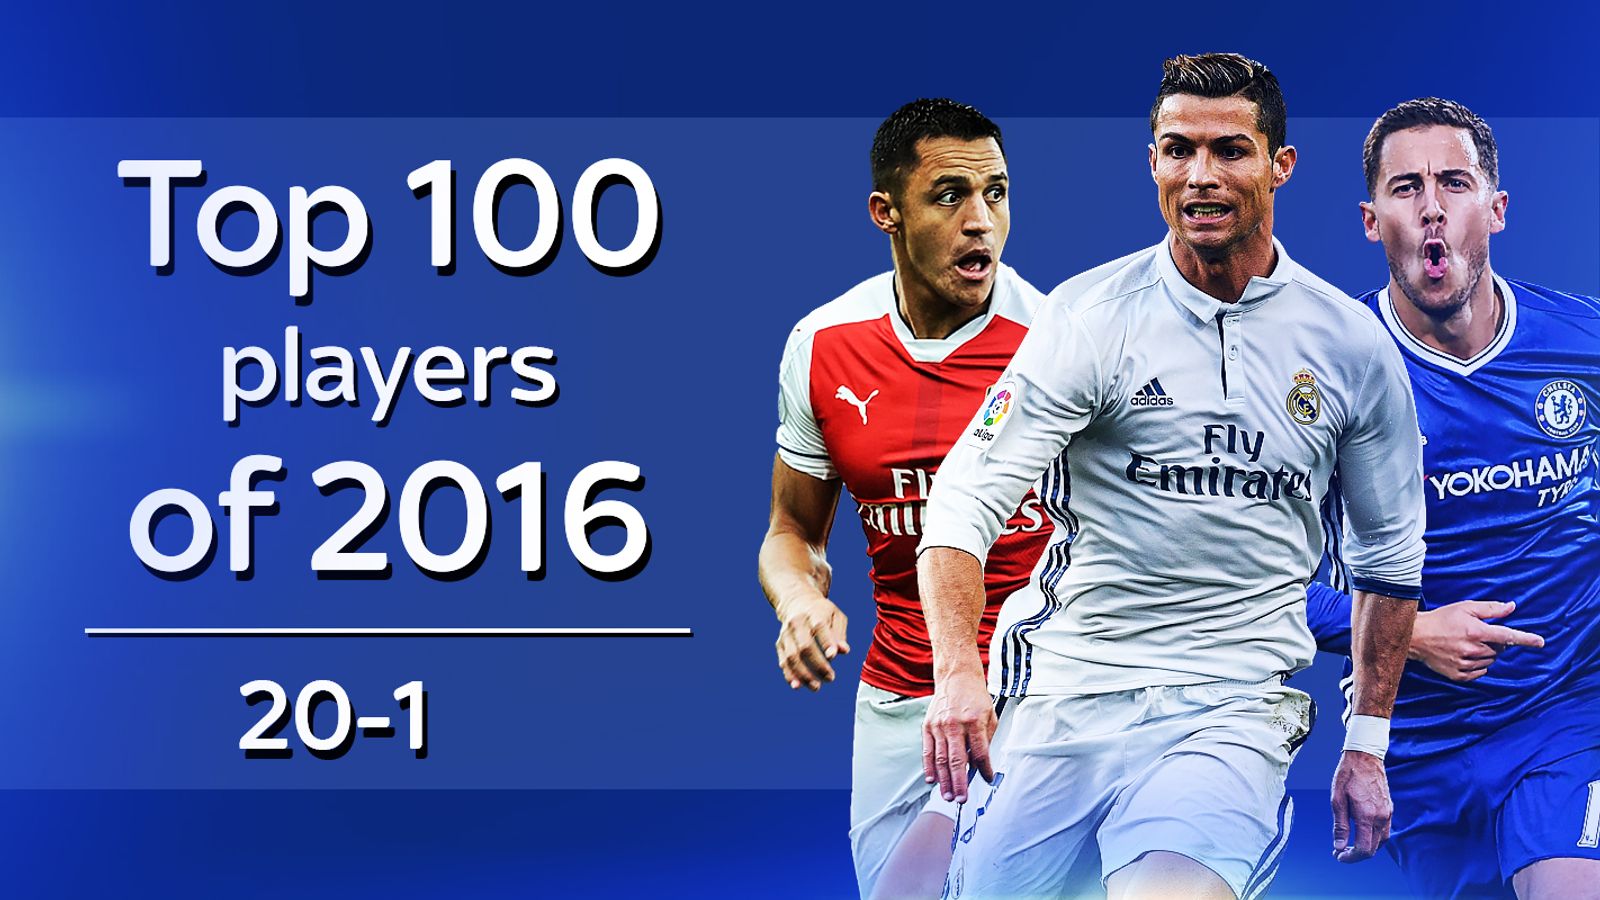 Top 100 players of 2016: Countdown continues as the No 1 player is